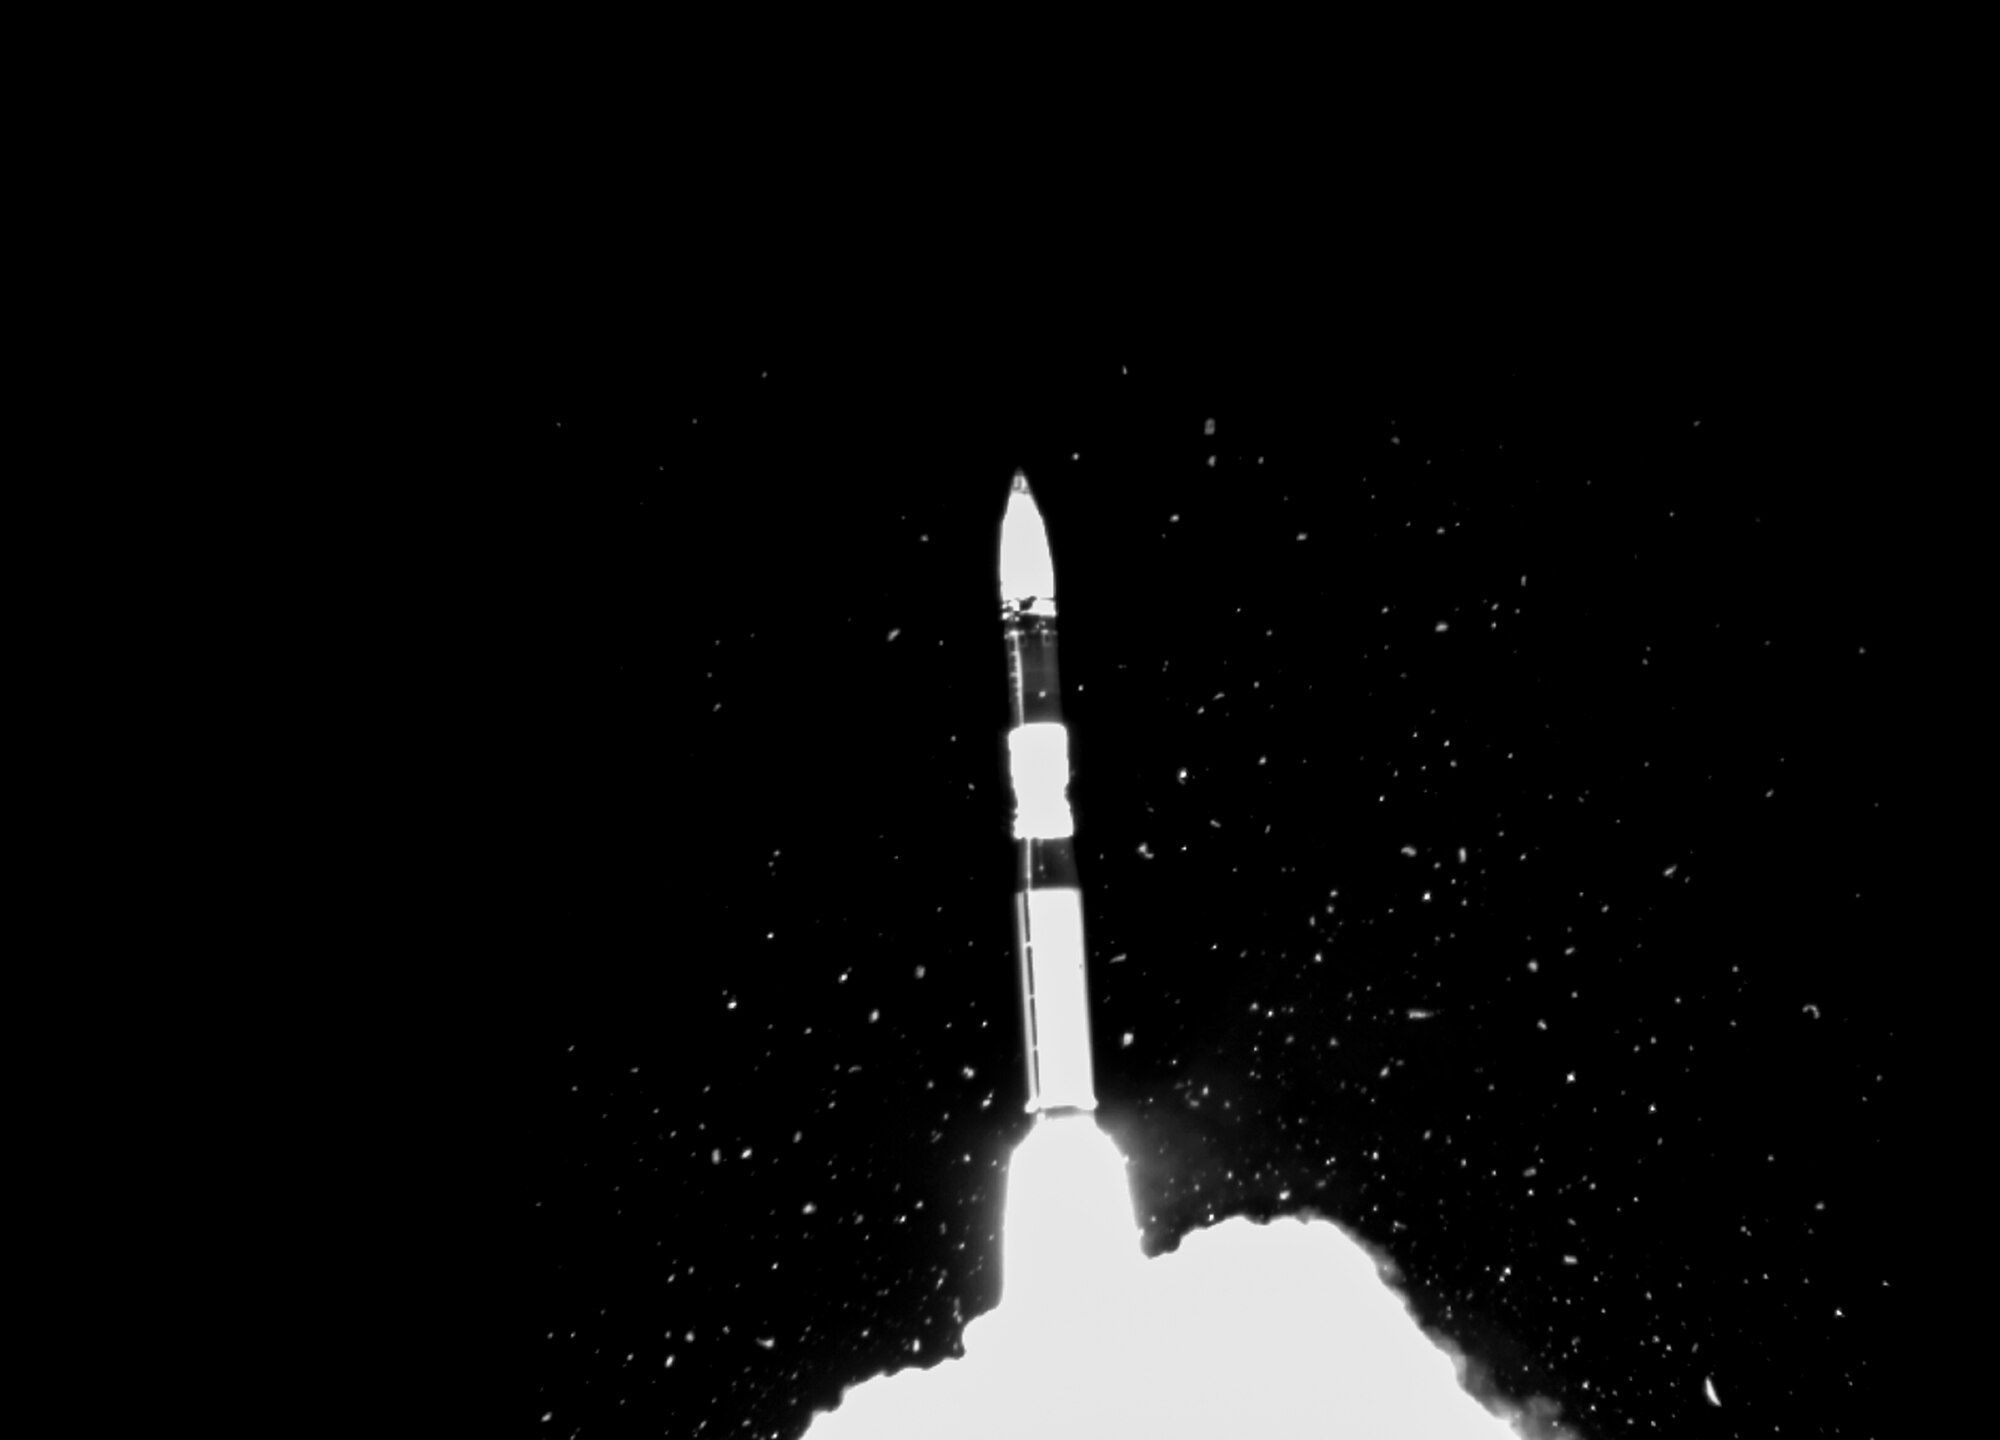 An Operational test launch of an Air Force Global Strike Command unarmed Minuteman III intercontinental ballistic missile, launched at 11:01 pm. Feb. 9 from Vandenberg Space Force Base, California.